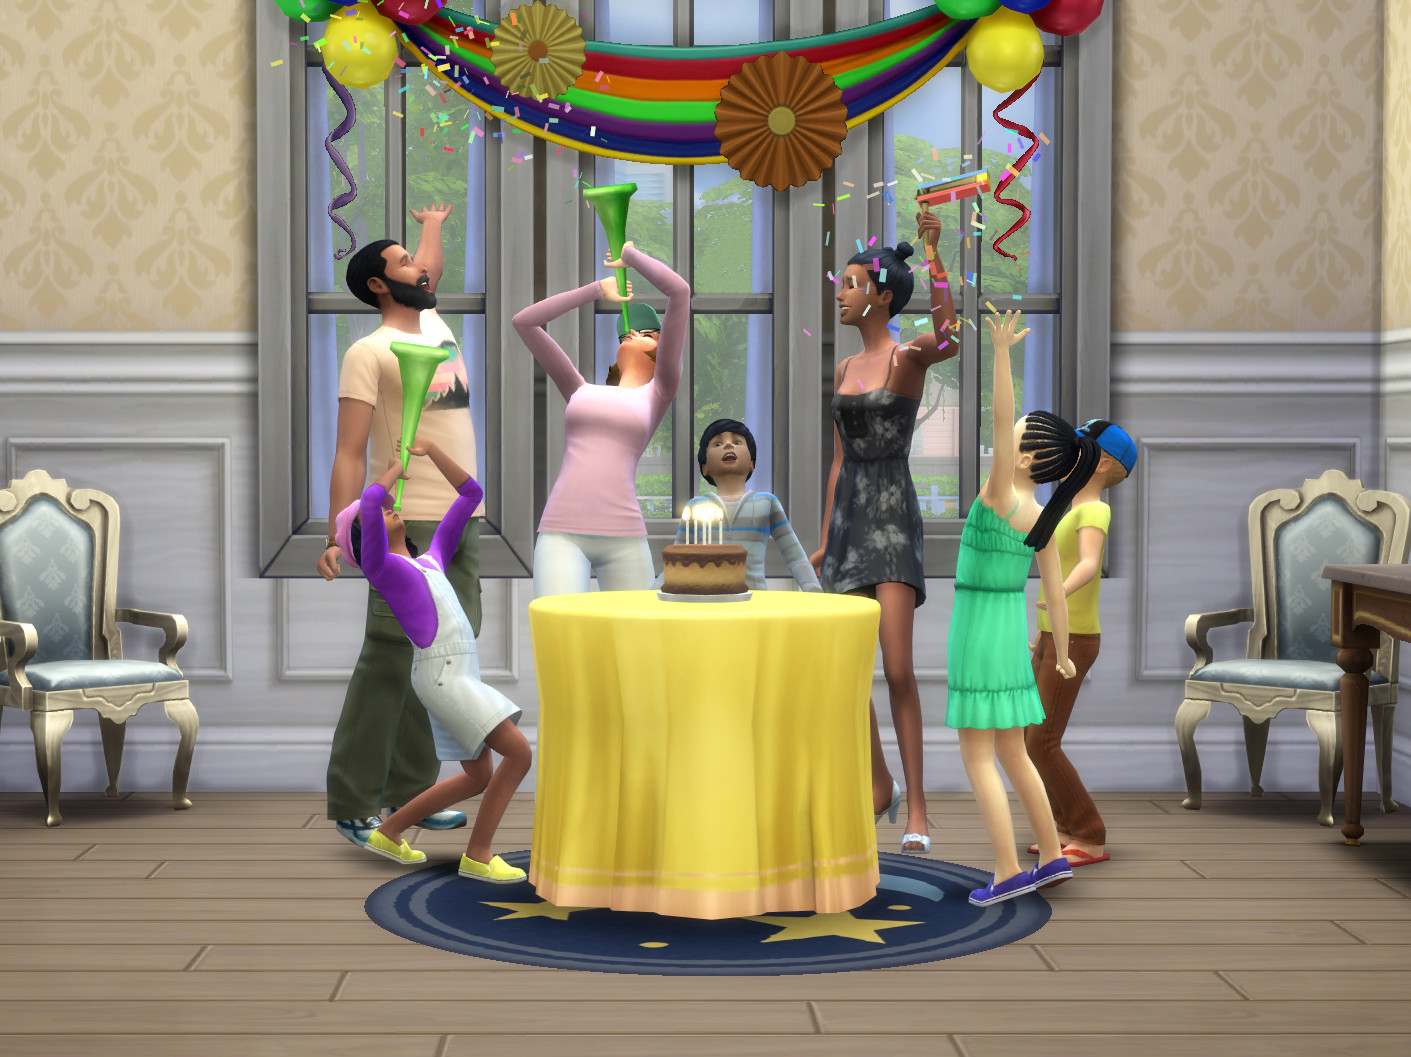 Sims 4 Dinner Party
 Social Events Throwing a Party in The Sims 4